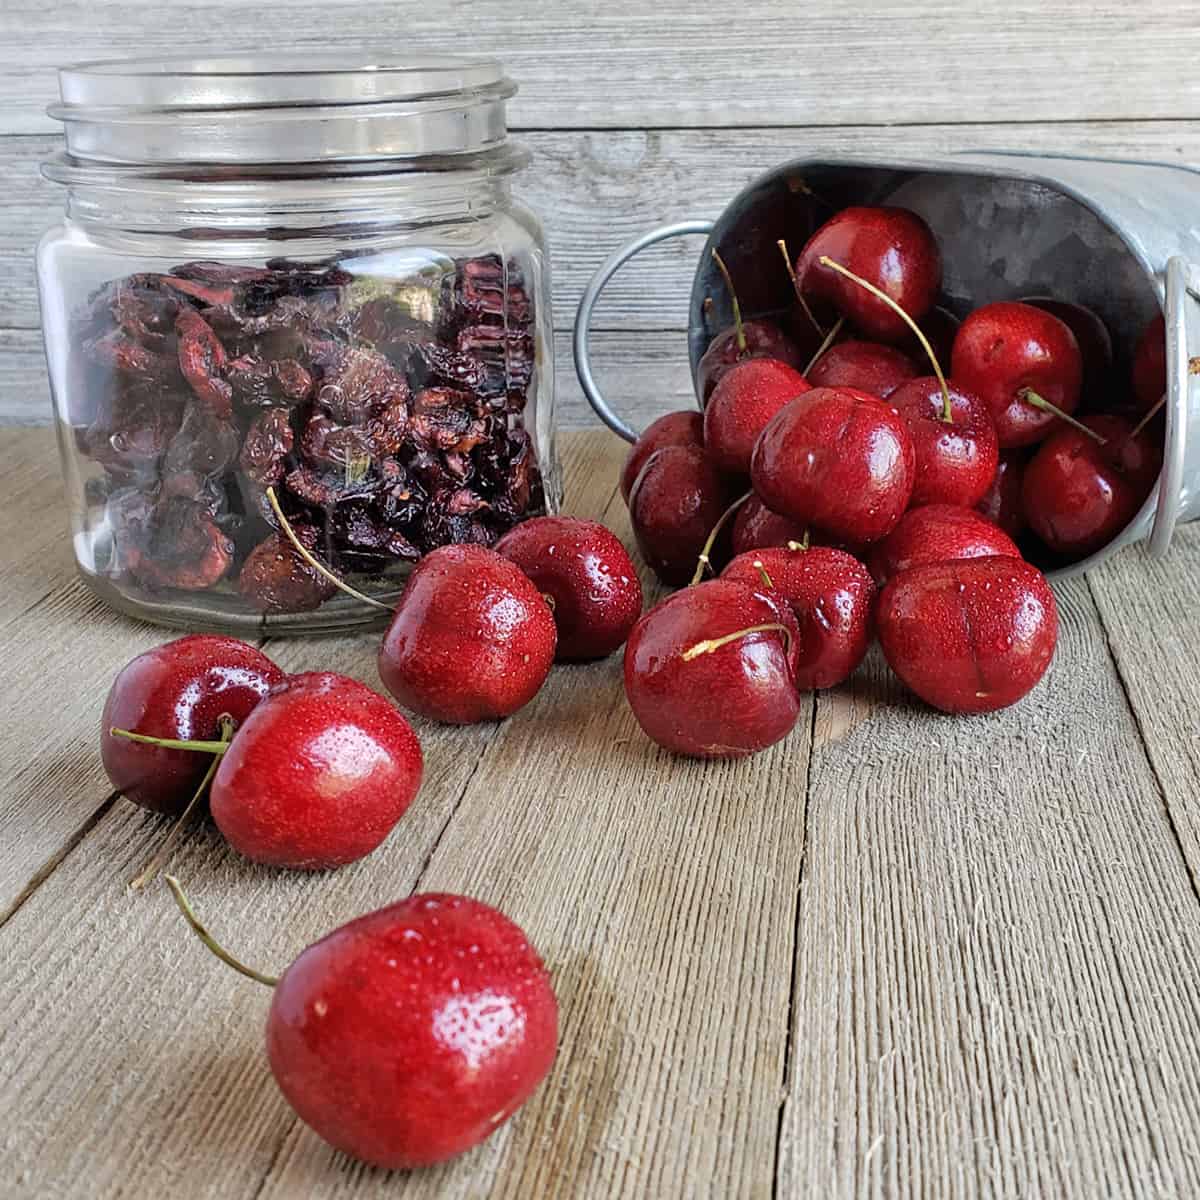 Jar of dried cherries next to fresh cherries spilling from metal container